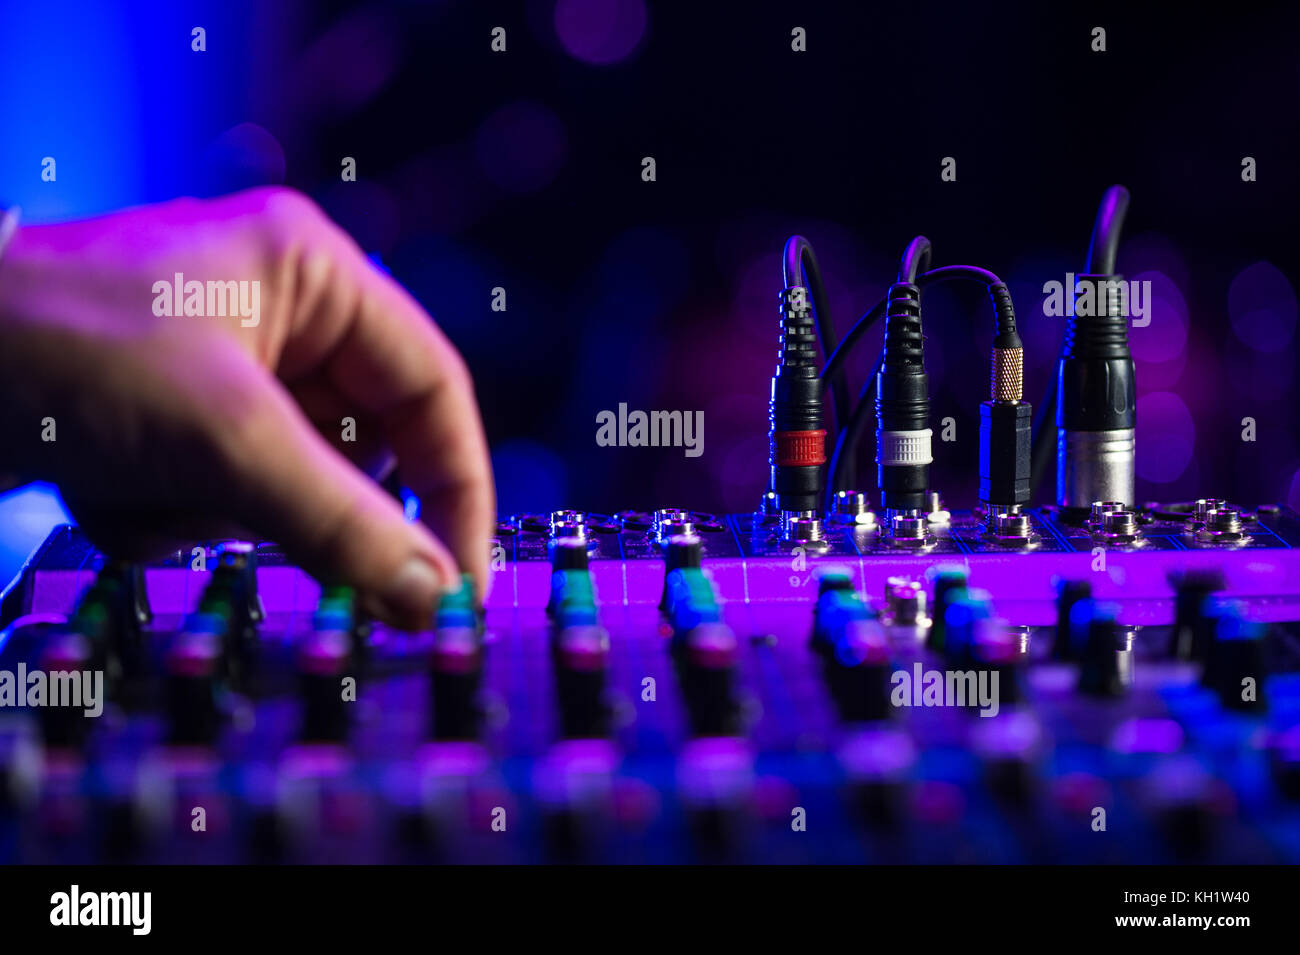 Dj S High Resolution Stock Photography and Images - Alamy